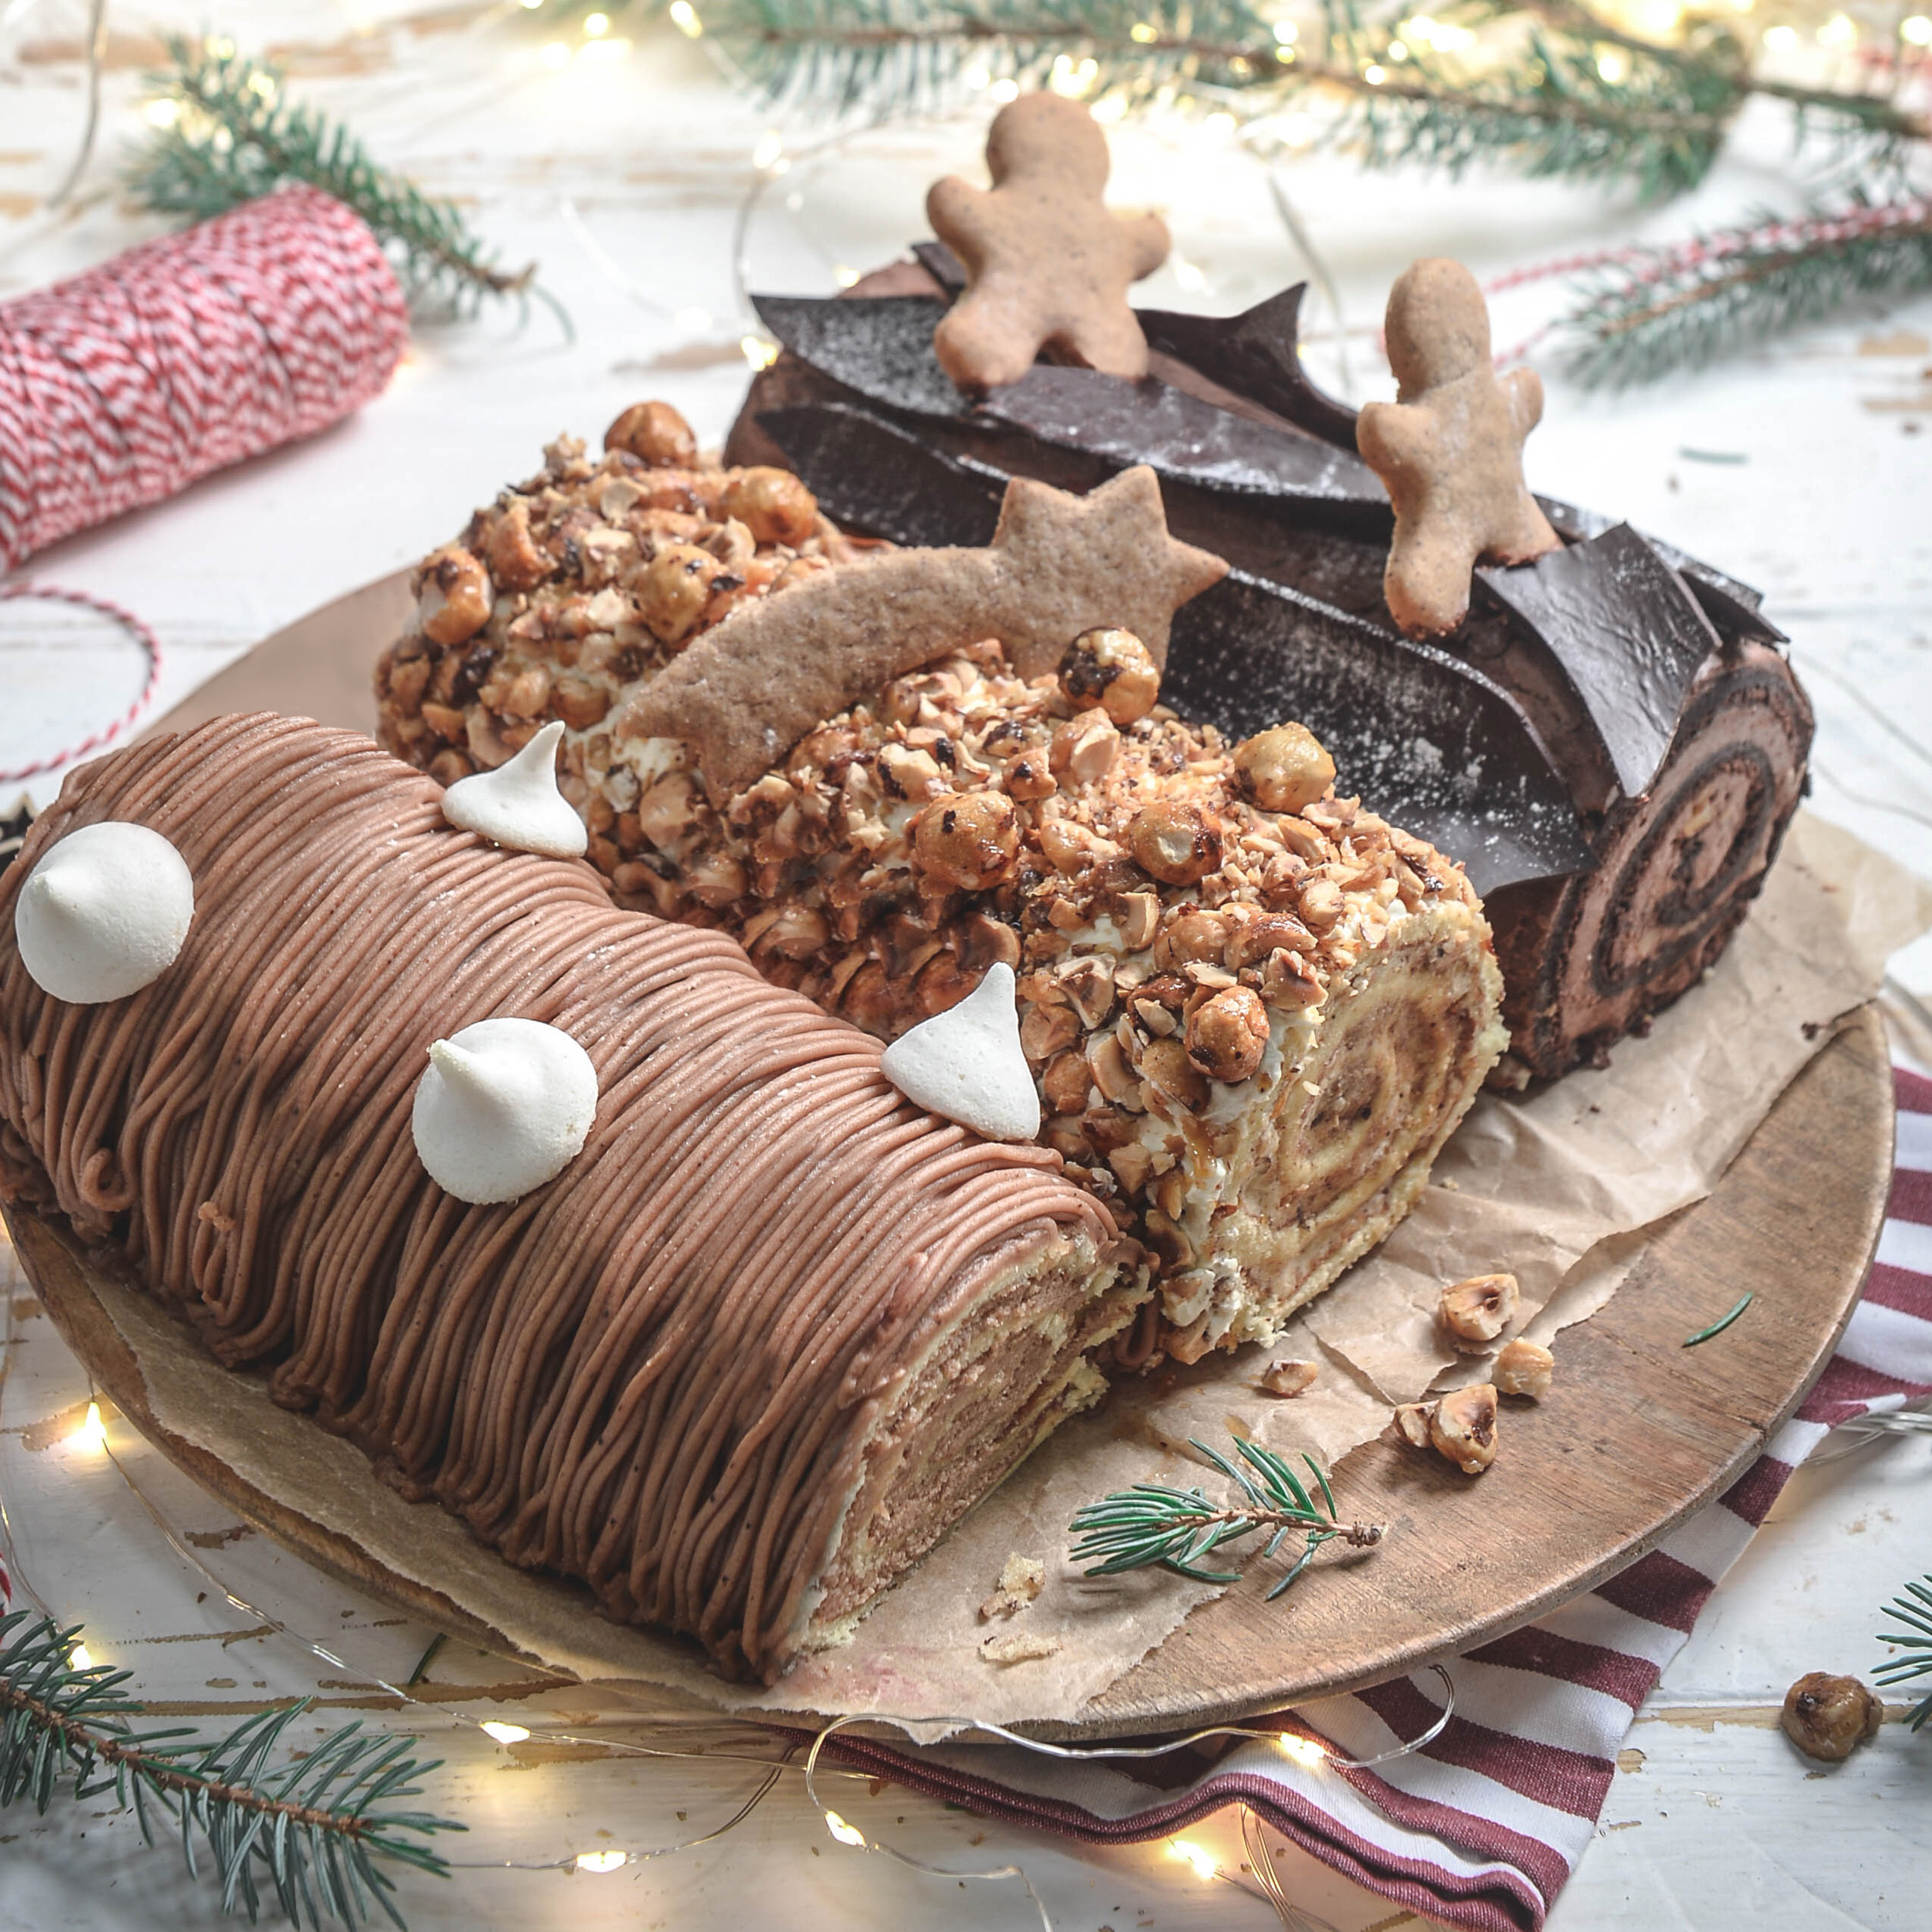 Crafting Festive Flavors for a Memorable Christmas!